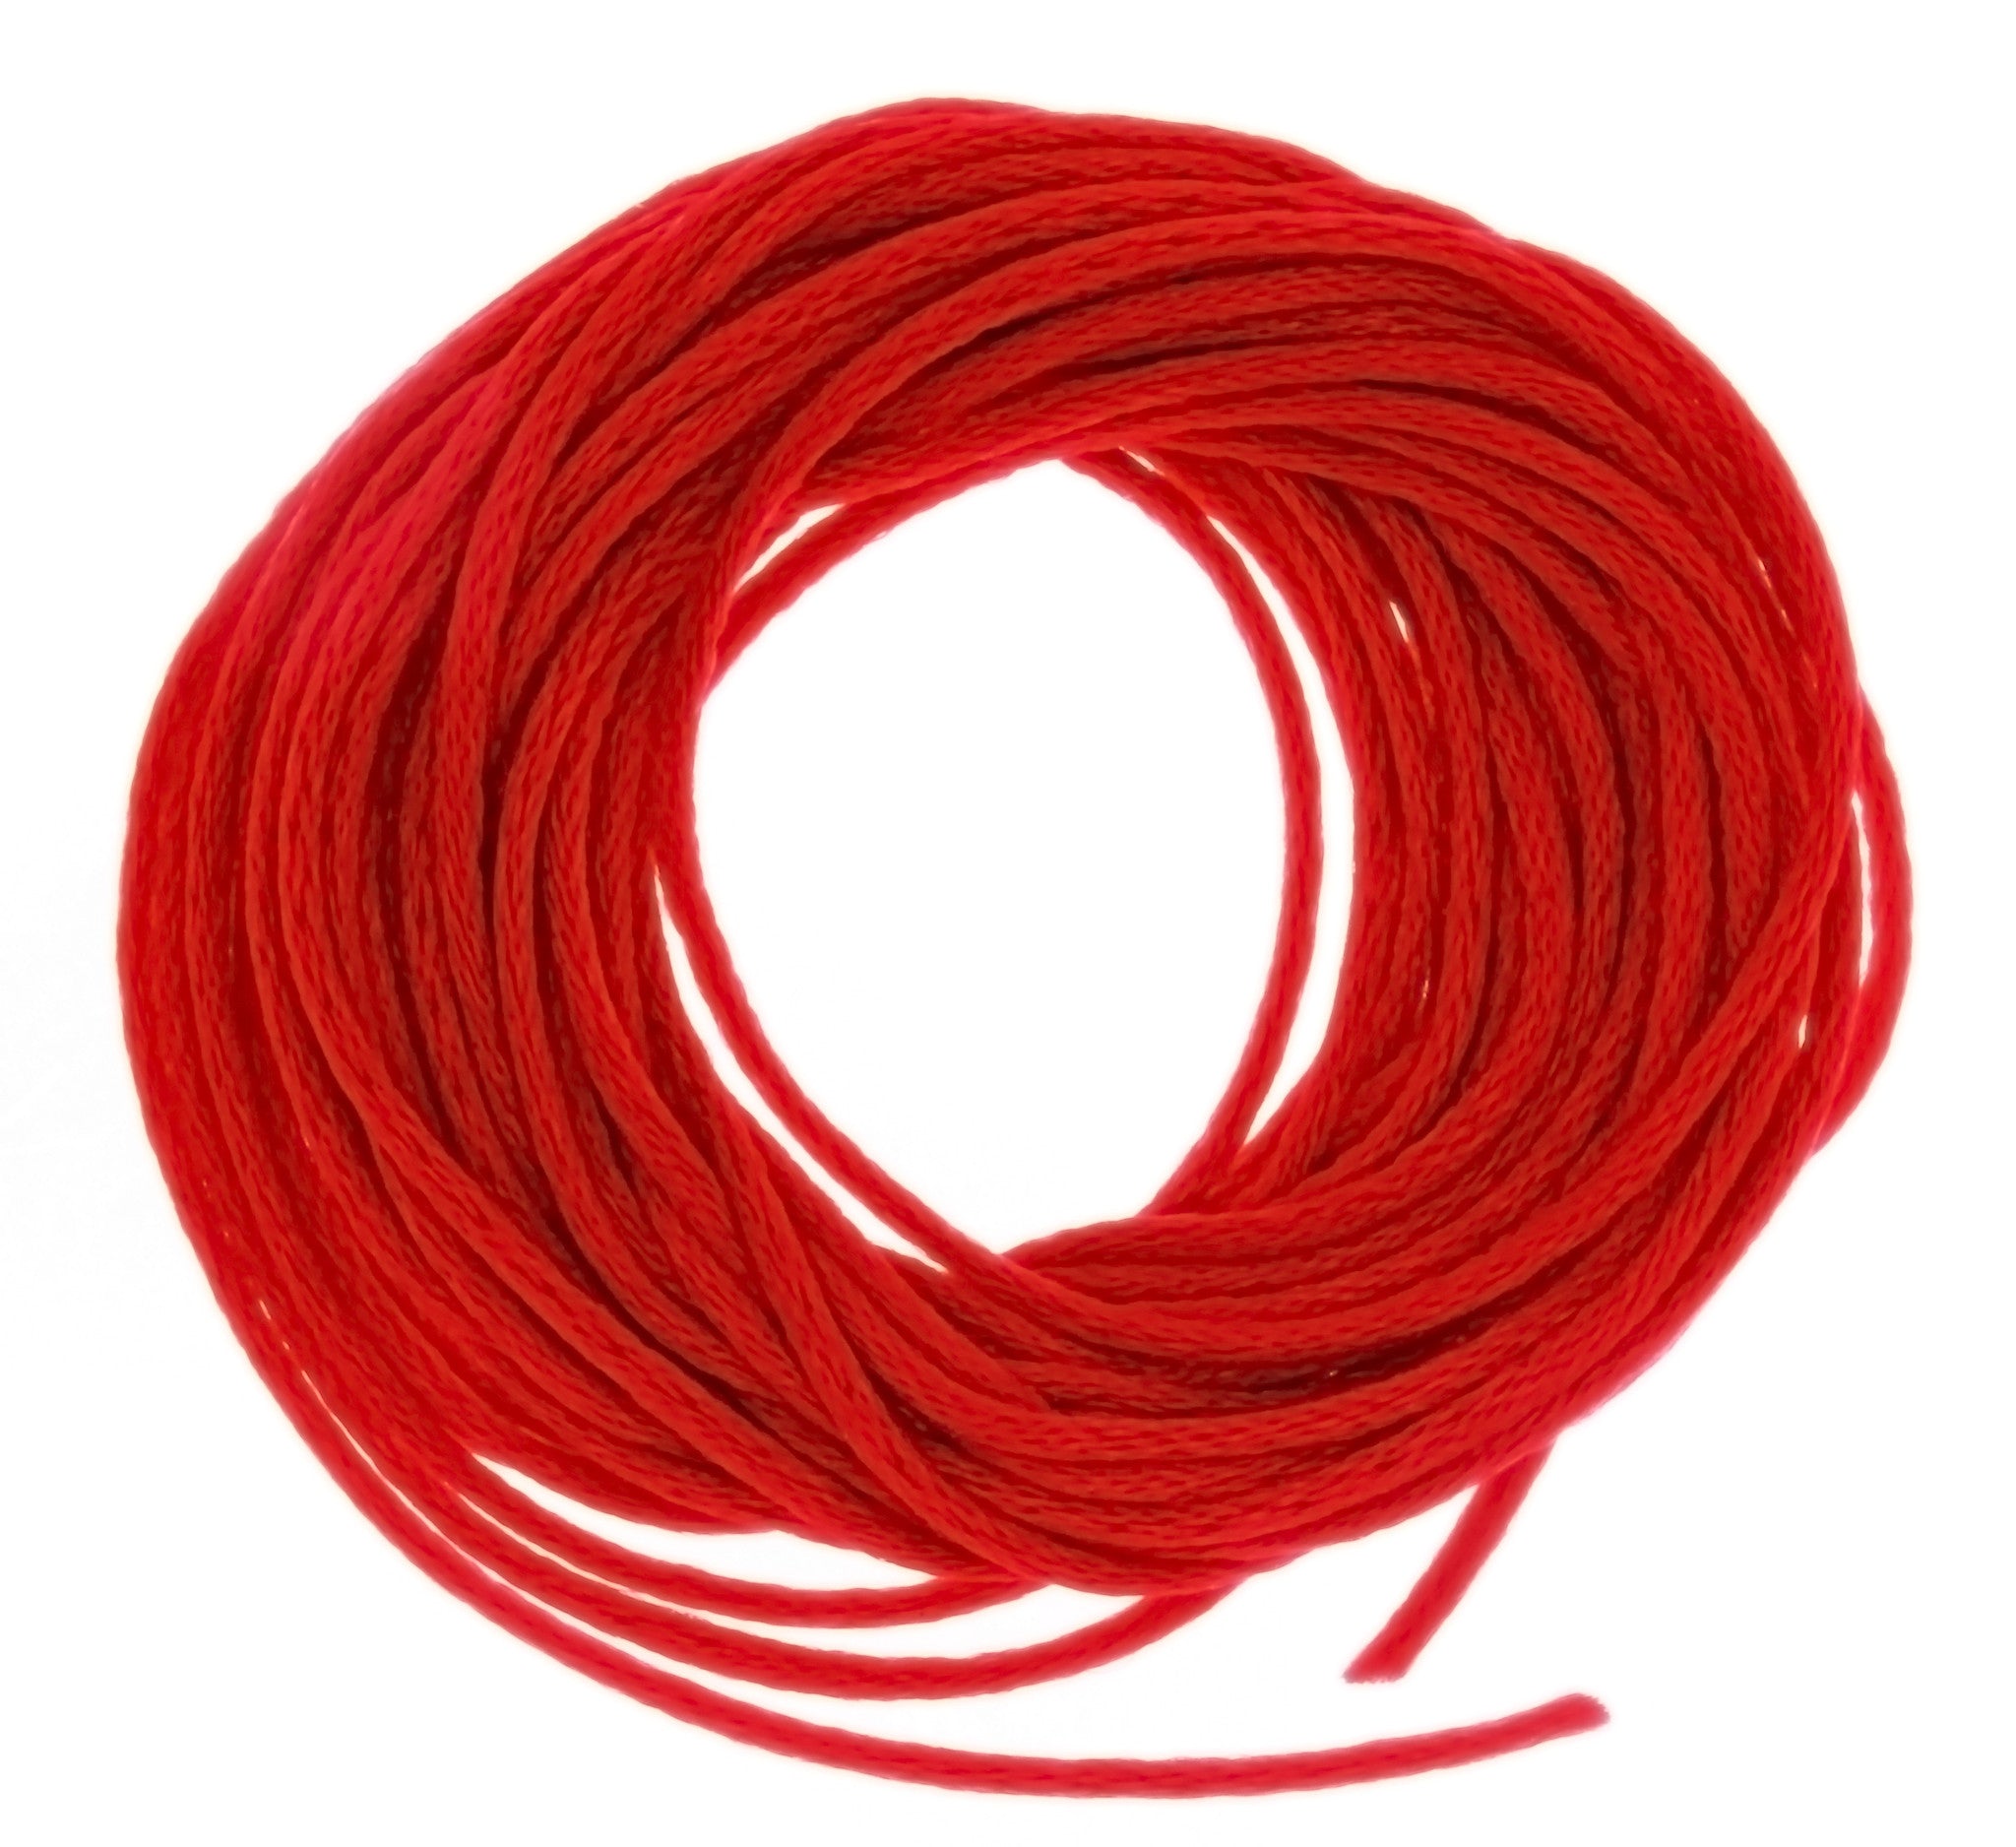 CORD SATIN RED 2 MM 6 YD